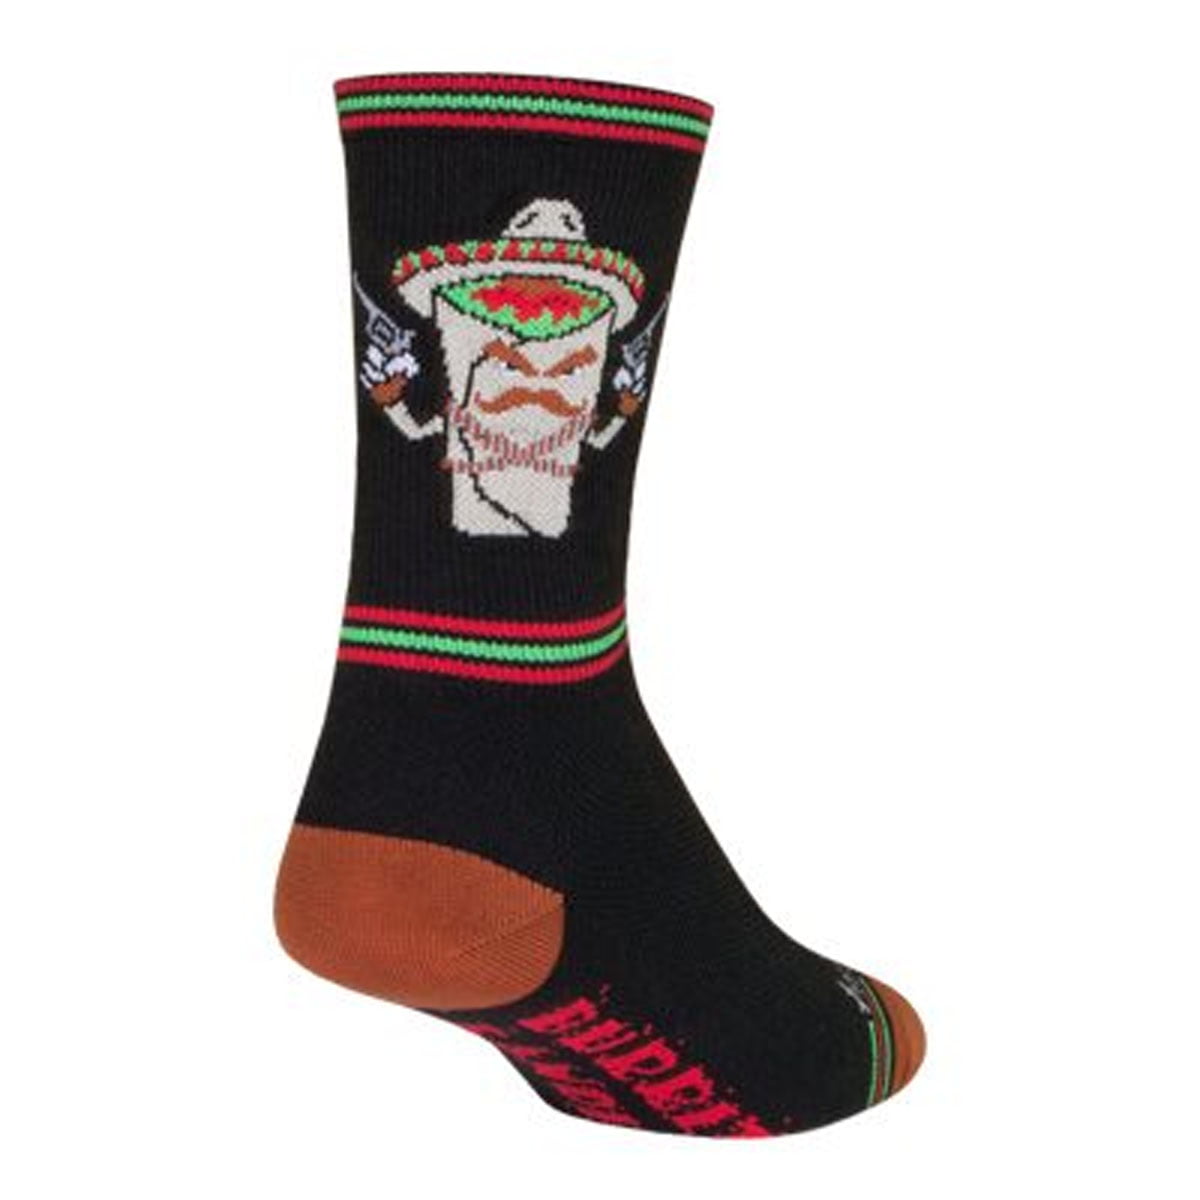 SockGuy Holiday/Limited Edition Eerie Crew S/M Cycling/Running Socks